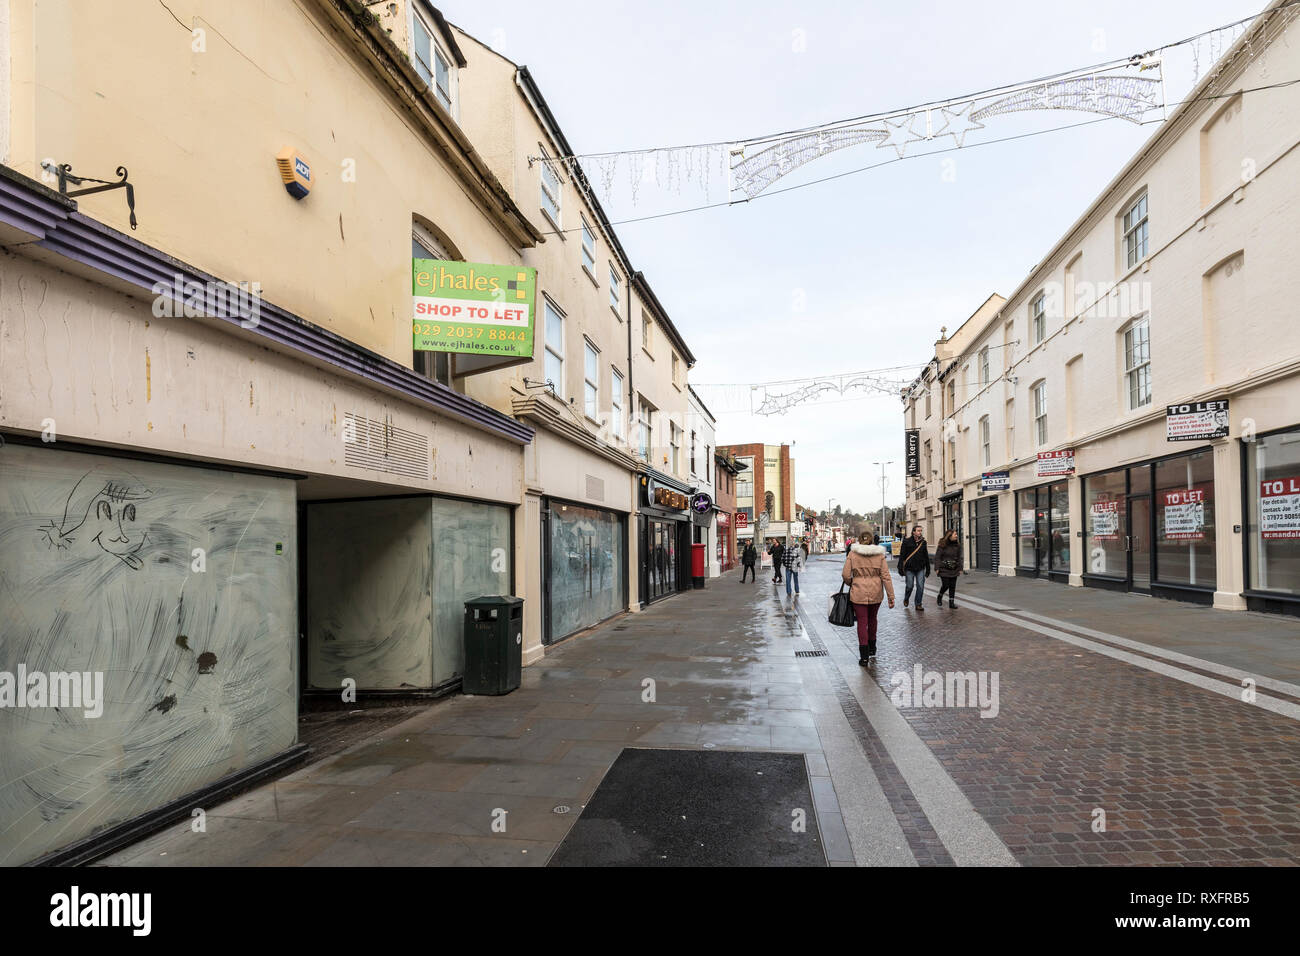 Closed shops with to let signs and broken windows, Hereford, UK Stock Photo